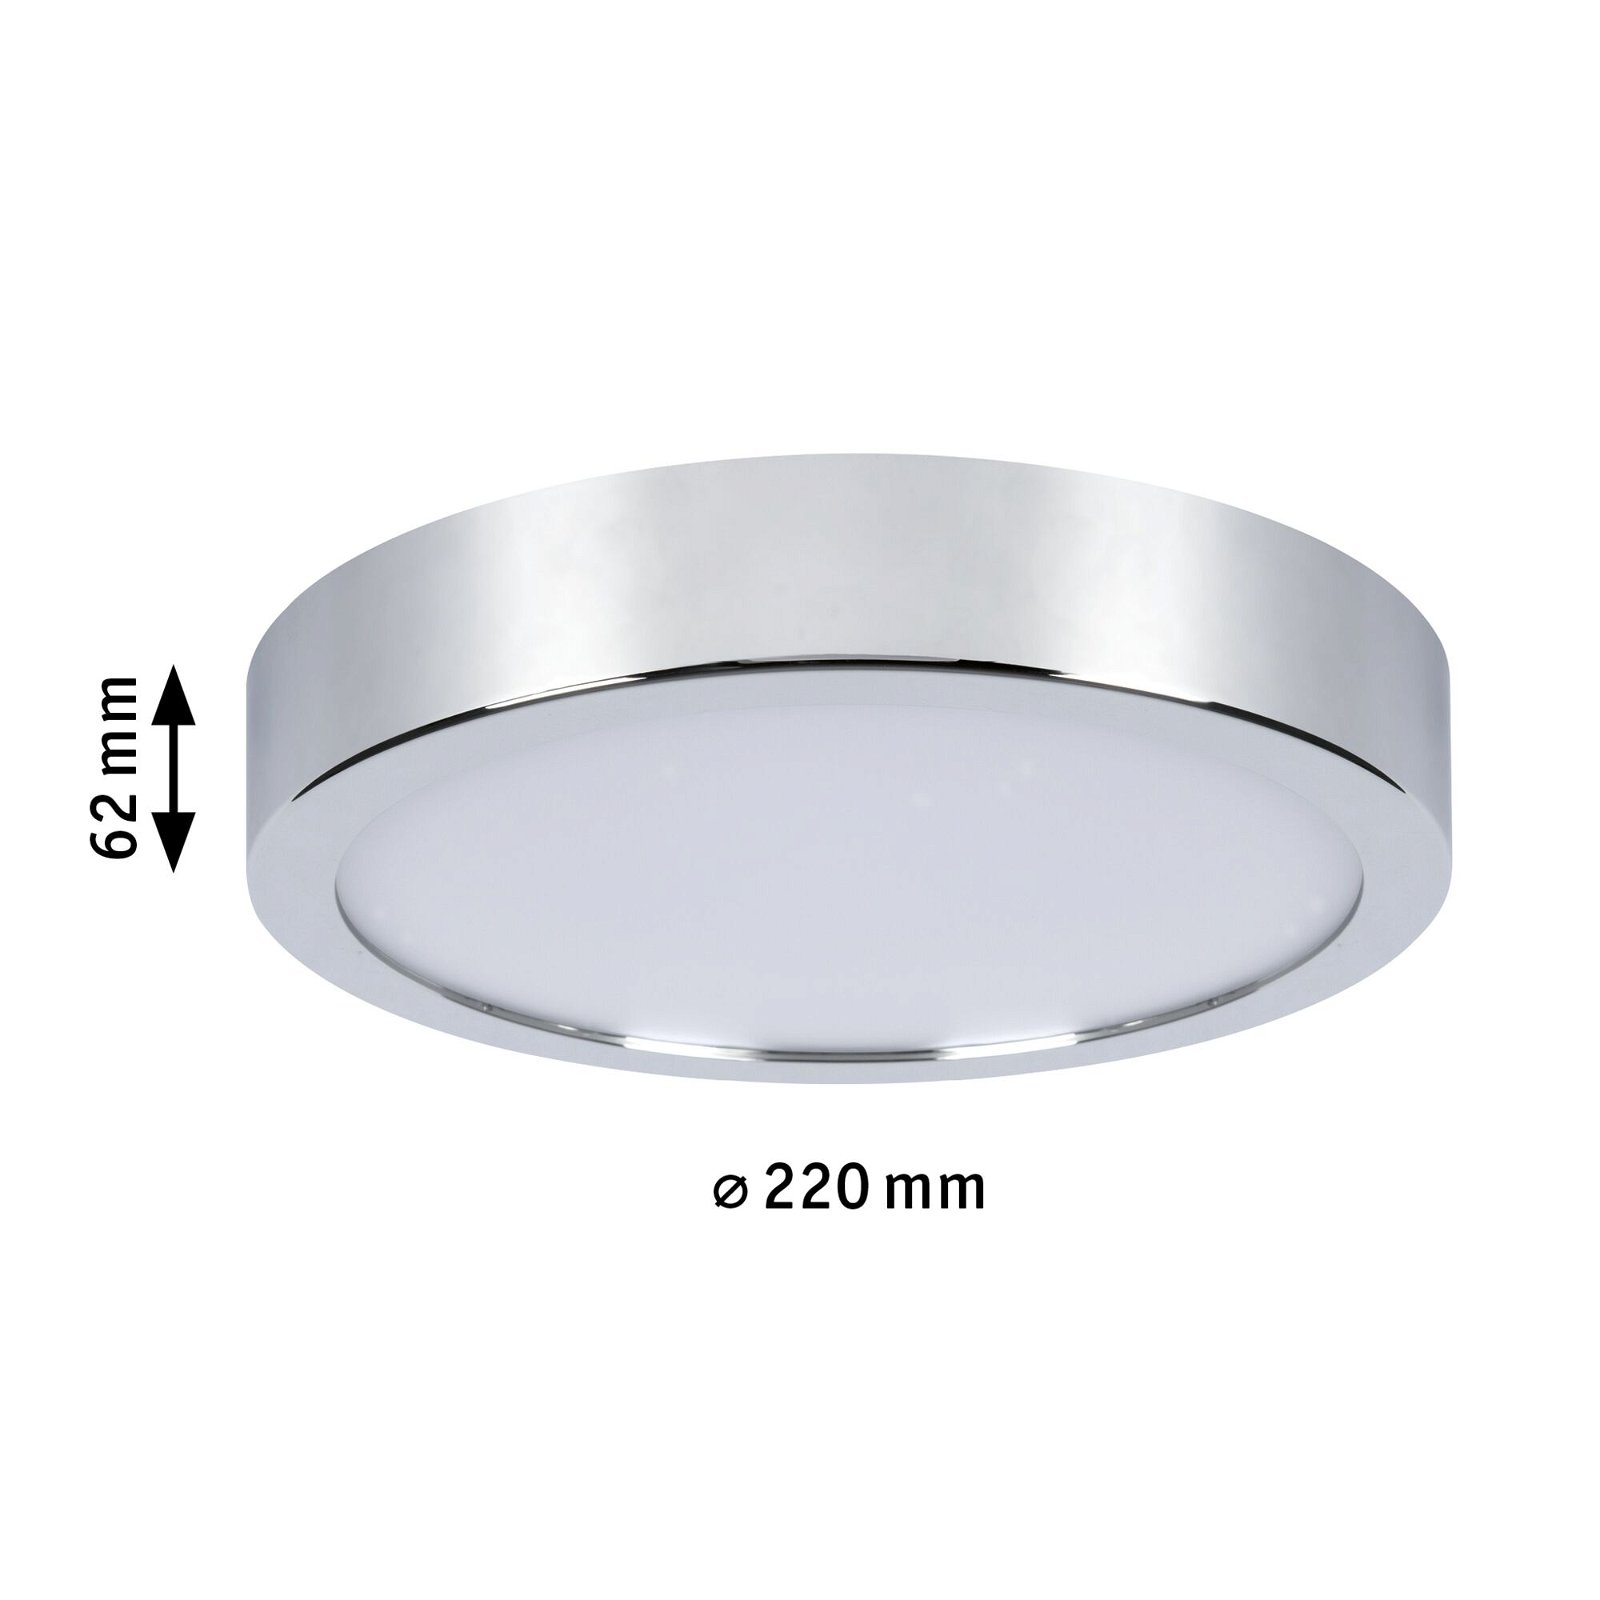 LED Panel Aviar IP44 round 220mm 13W 950lm 3000K Chrome dimmable